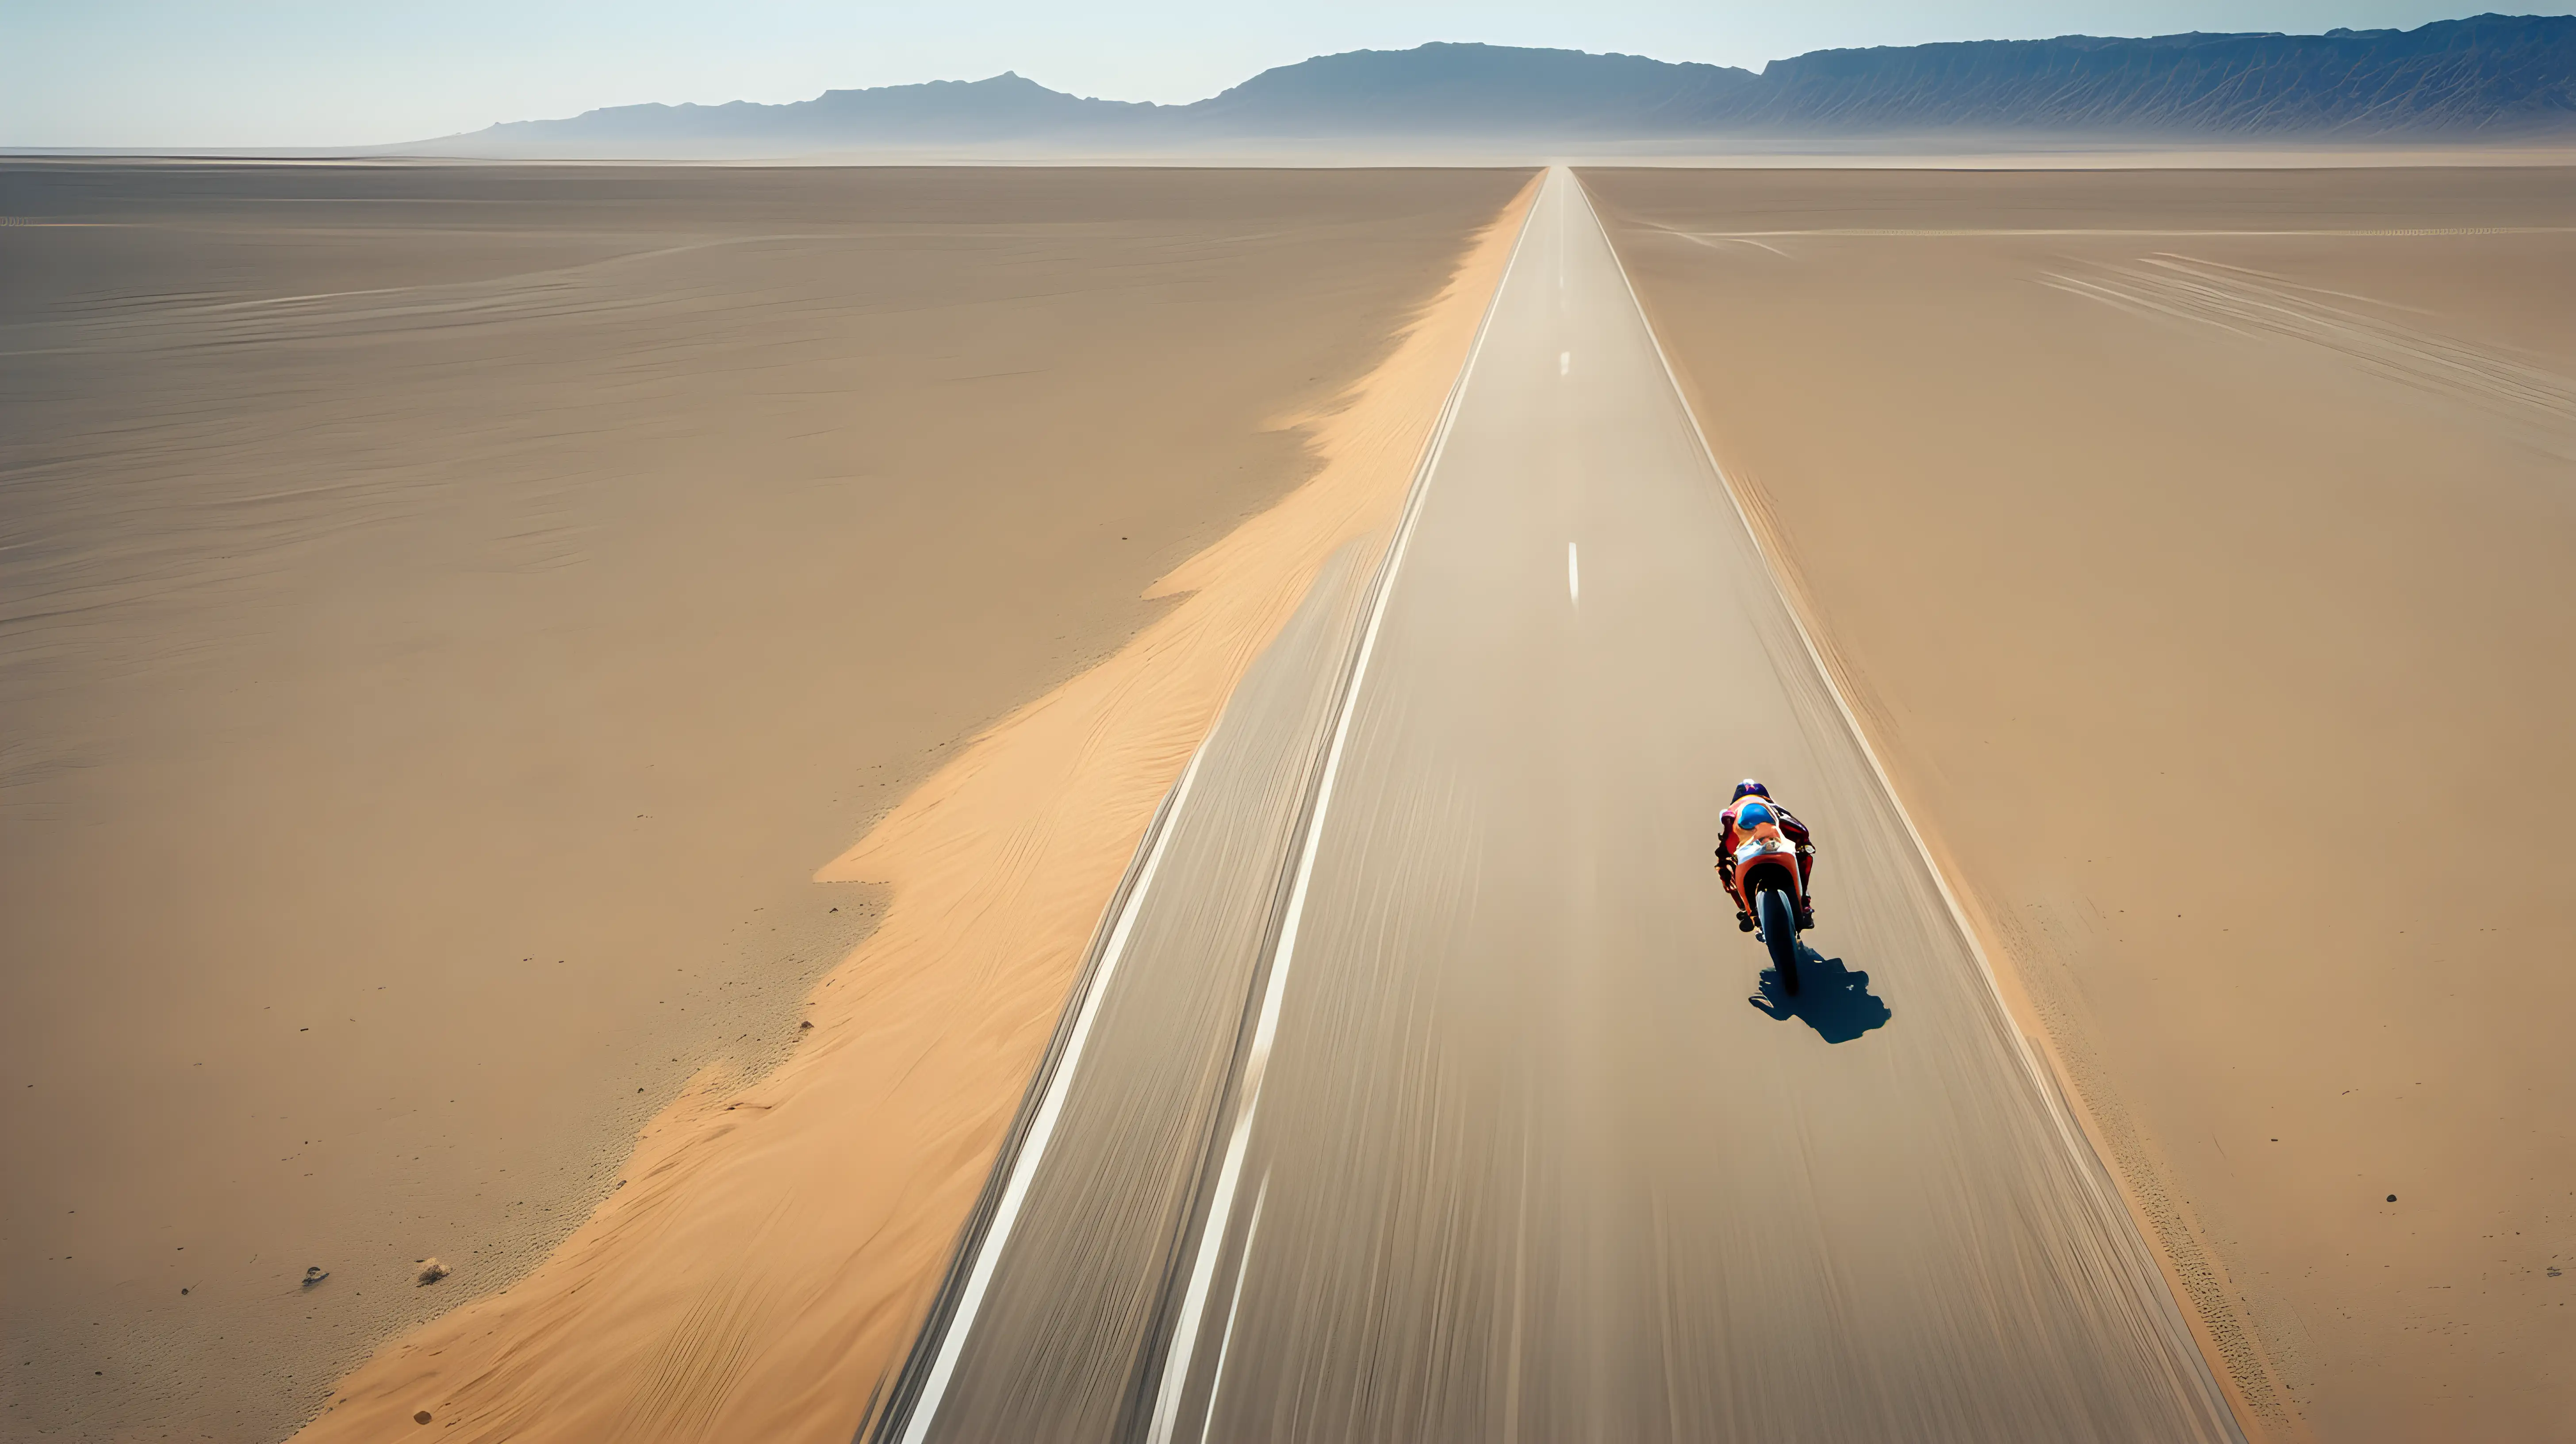 A stunning aerial shot of a racing bike speeding along a deserted desert highway, the rider's brightly colored racing suit standing out against the vast expanse of sand.